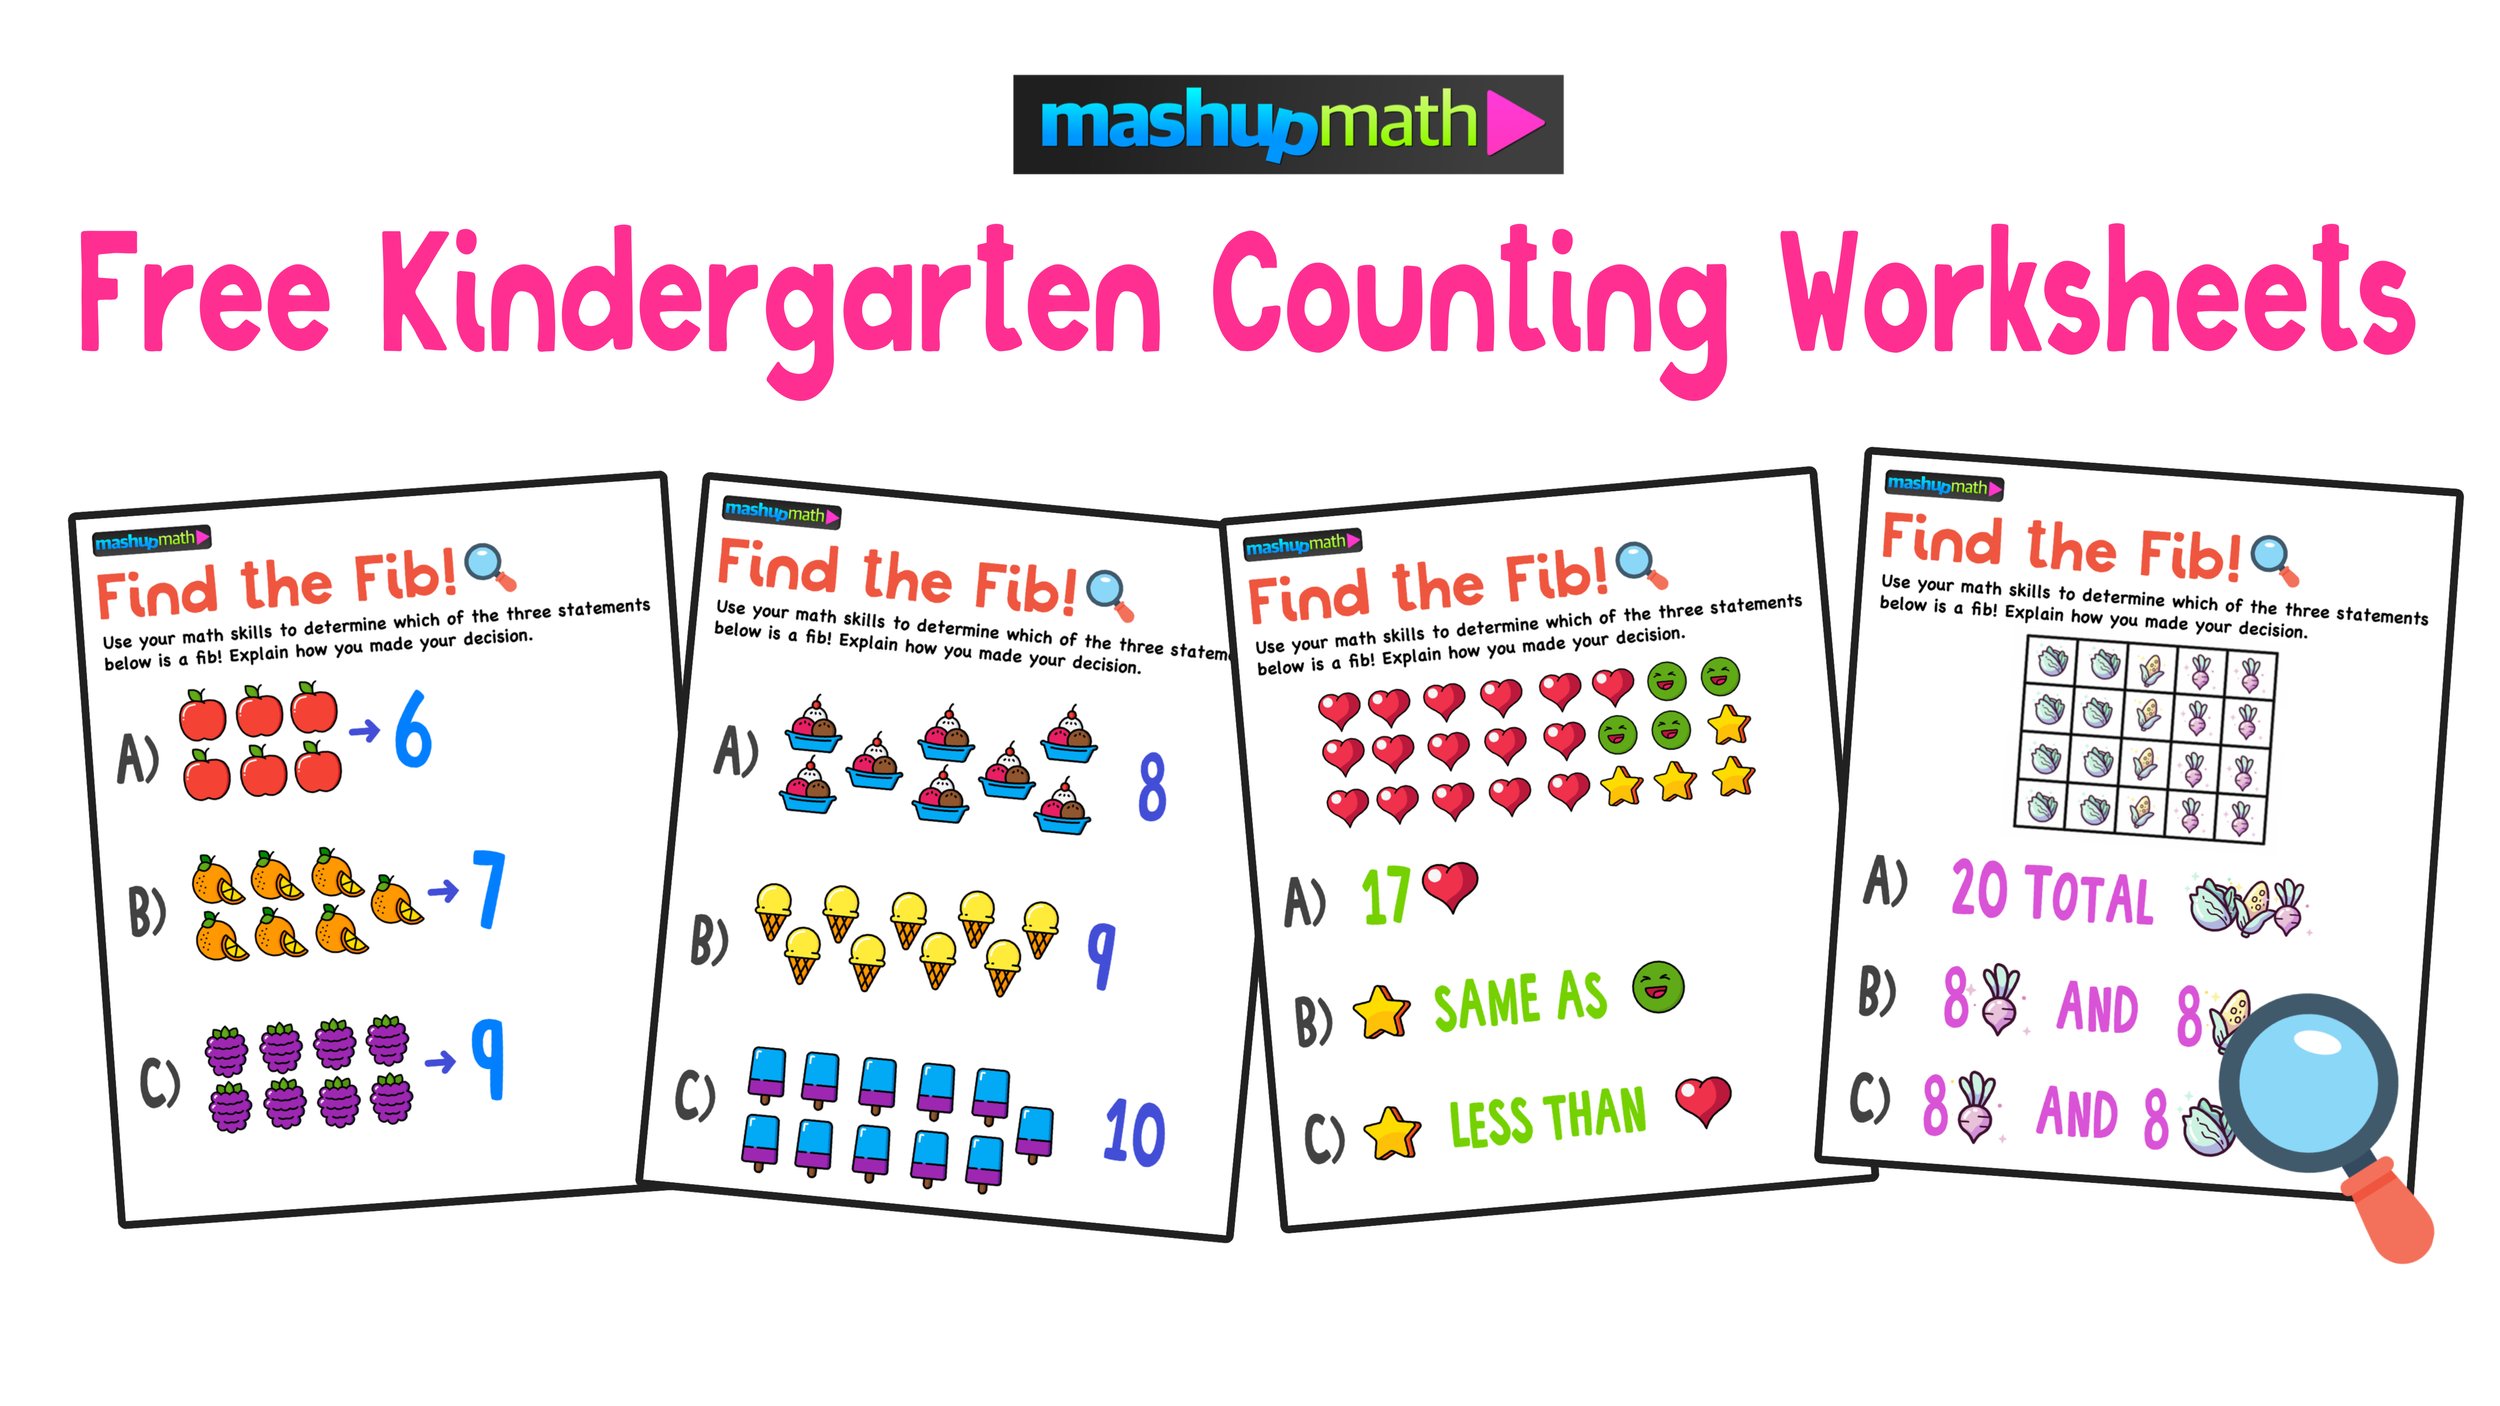 10 Free Counting Worksheets for Kindergarten